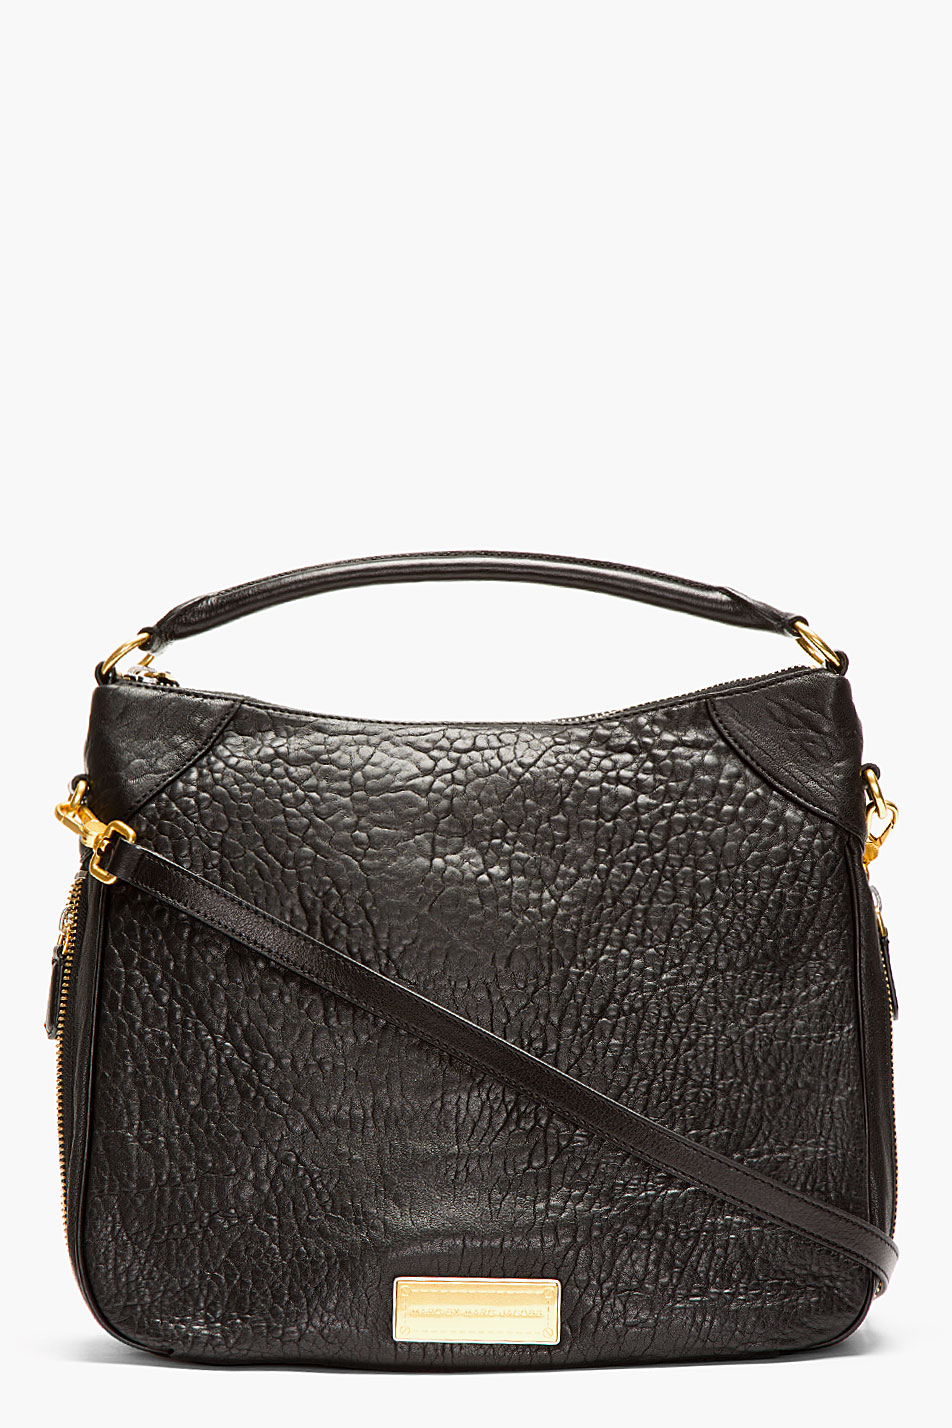 Marc By Marc Jacobs Black Washed Leather Zip Billy Hobo Bag - Lyst